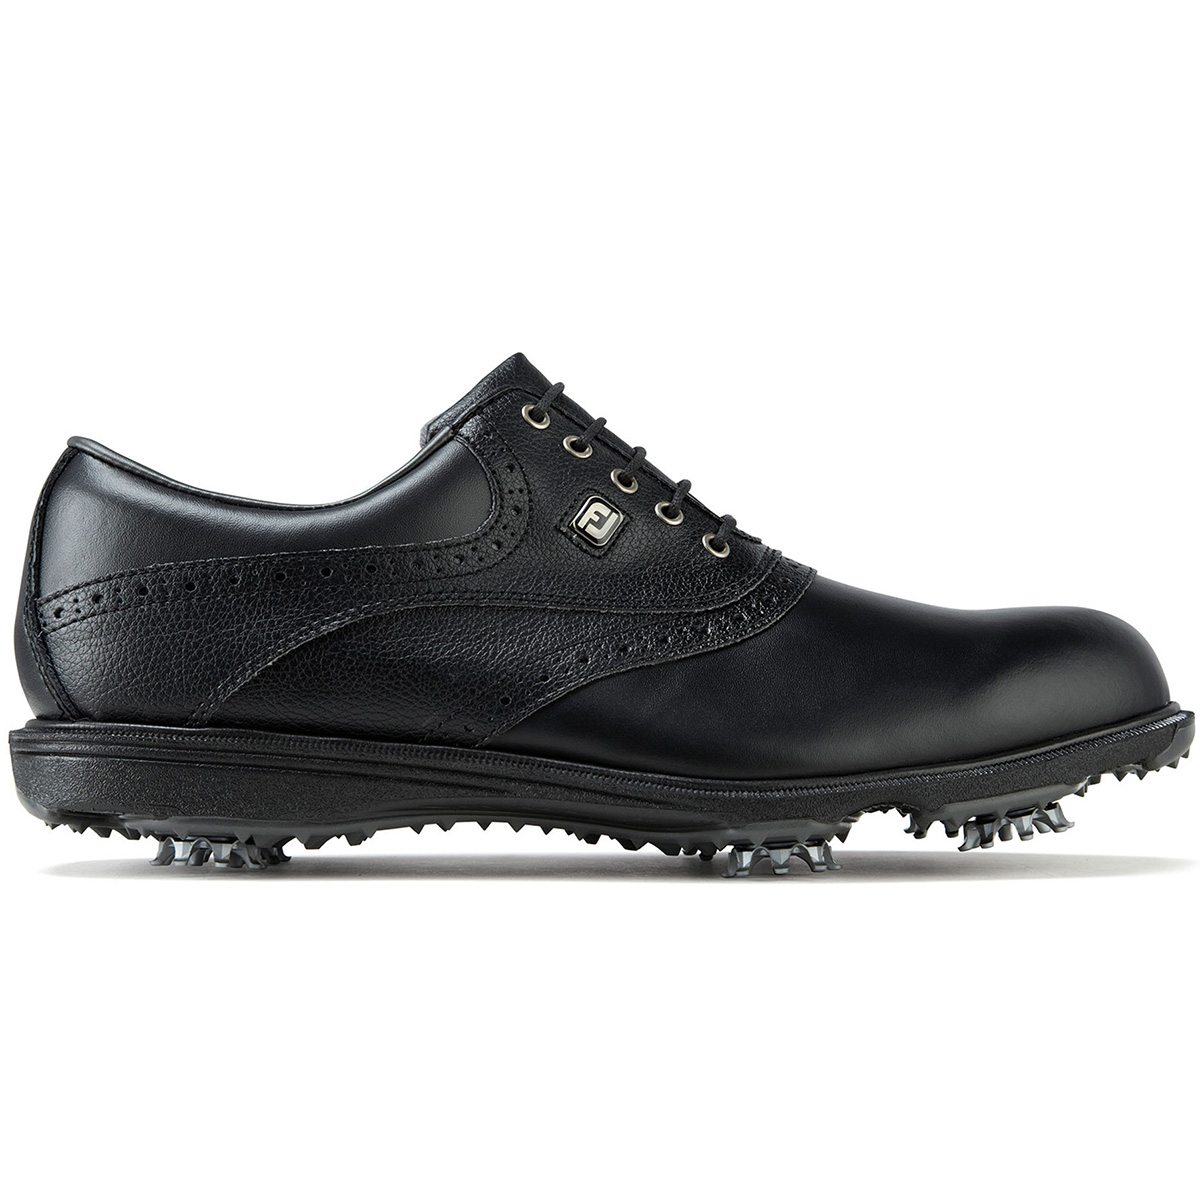 FootJoy Hydrolite 2 Shoes from american 